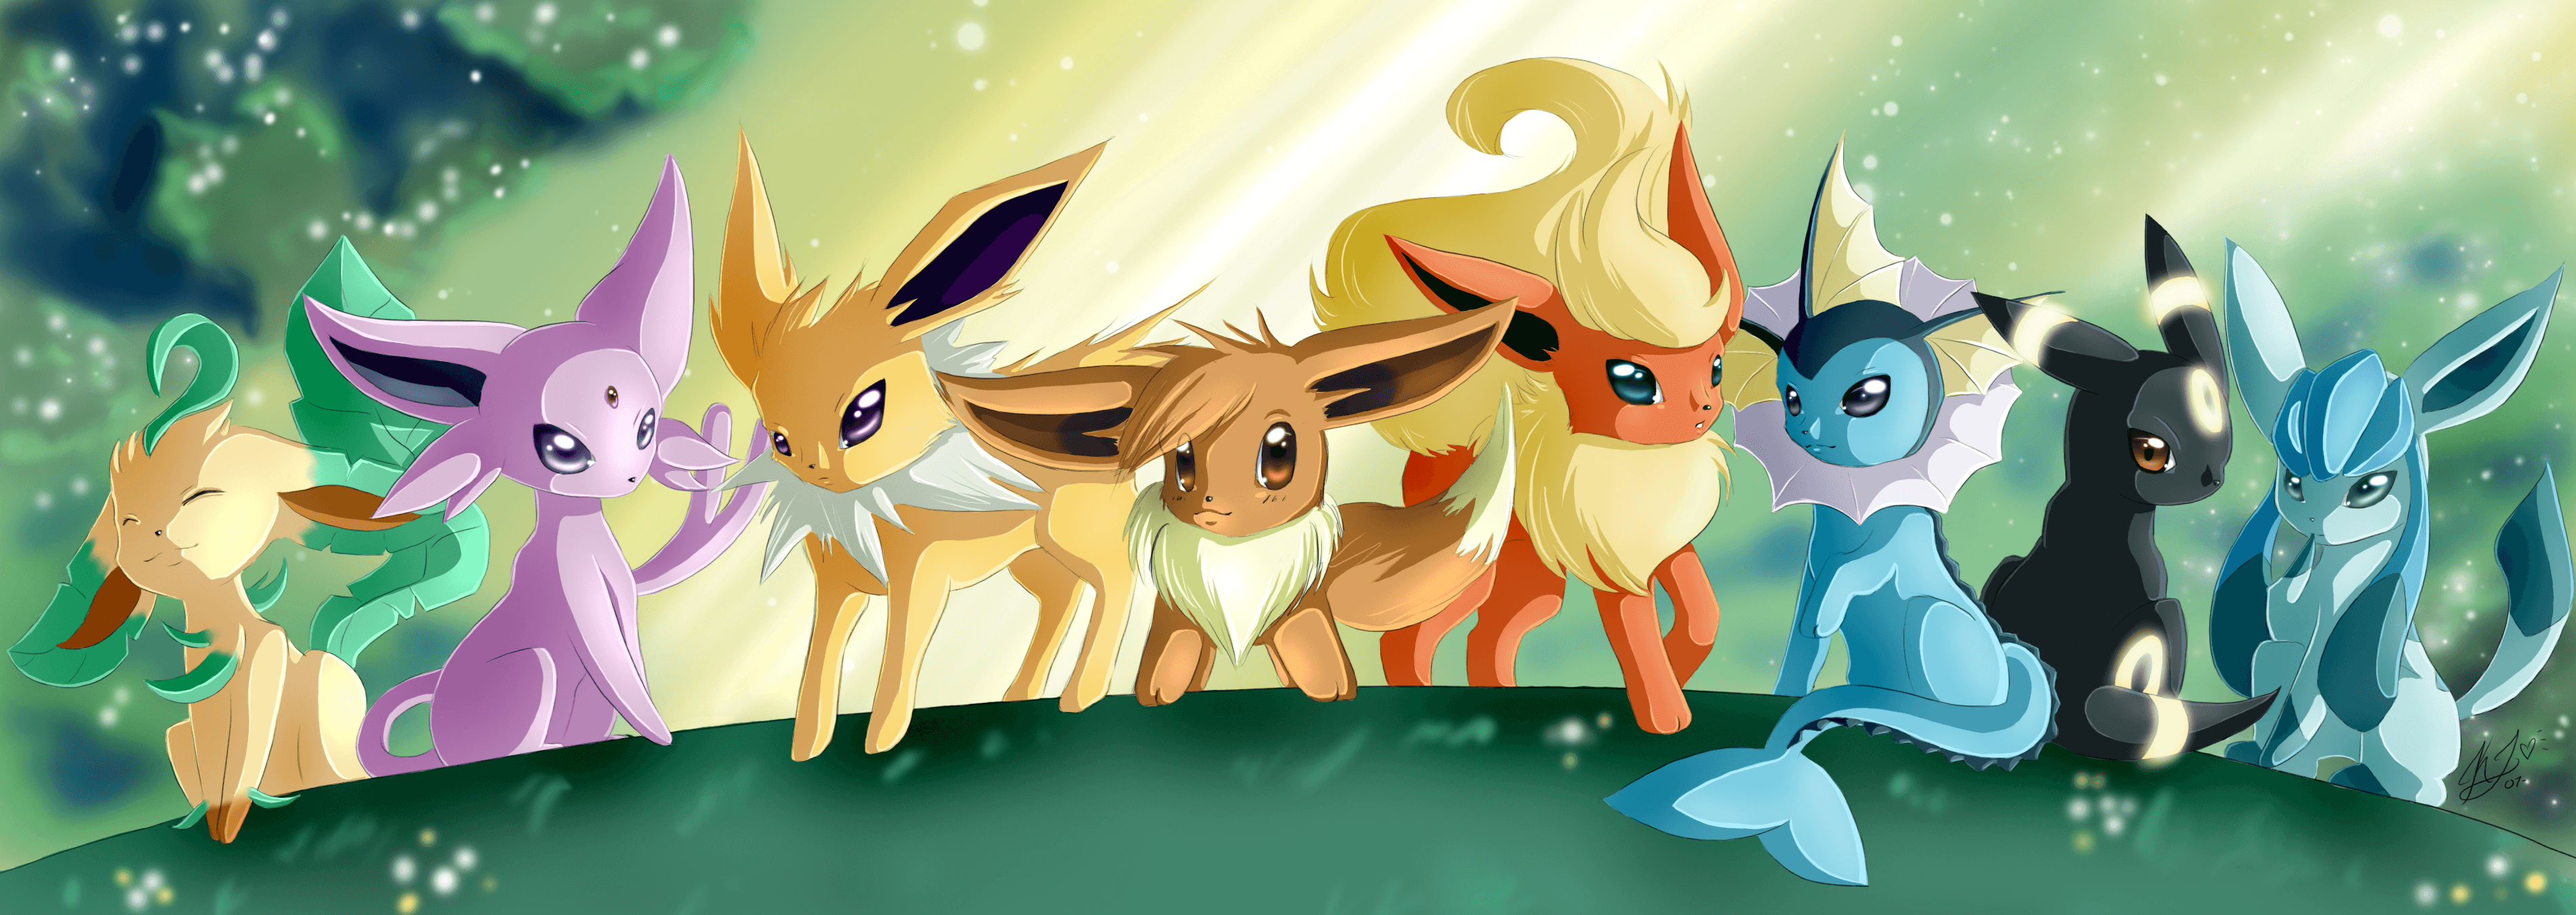 Eevee (Pokémon) HD Wallpaper and Background Image